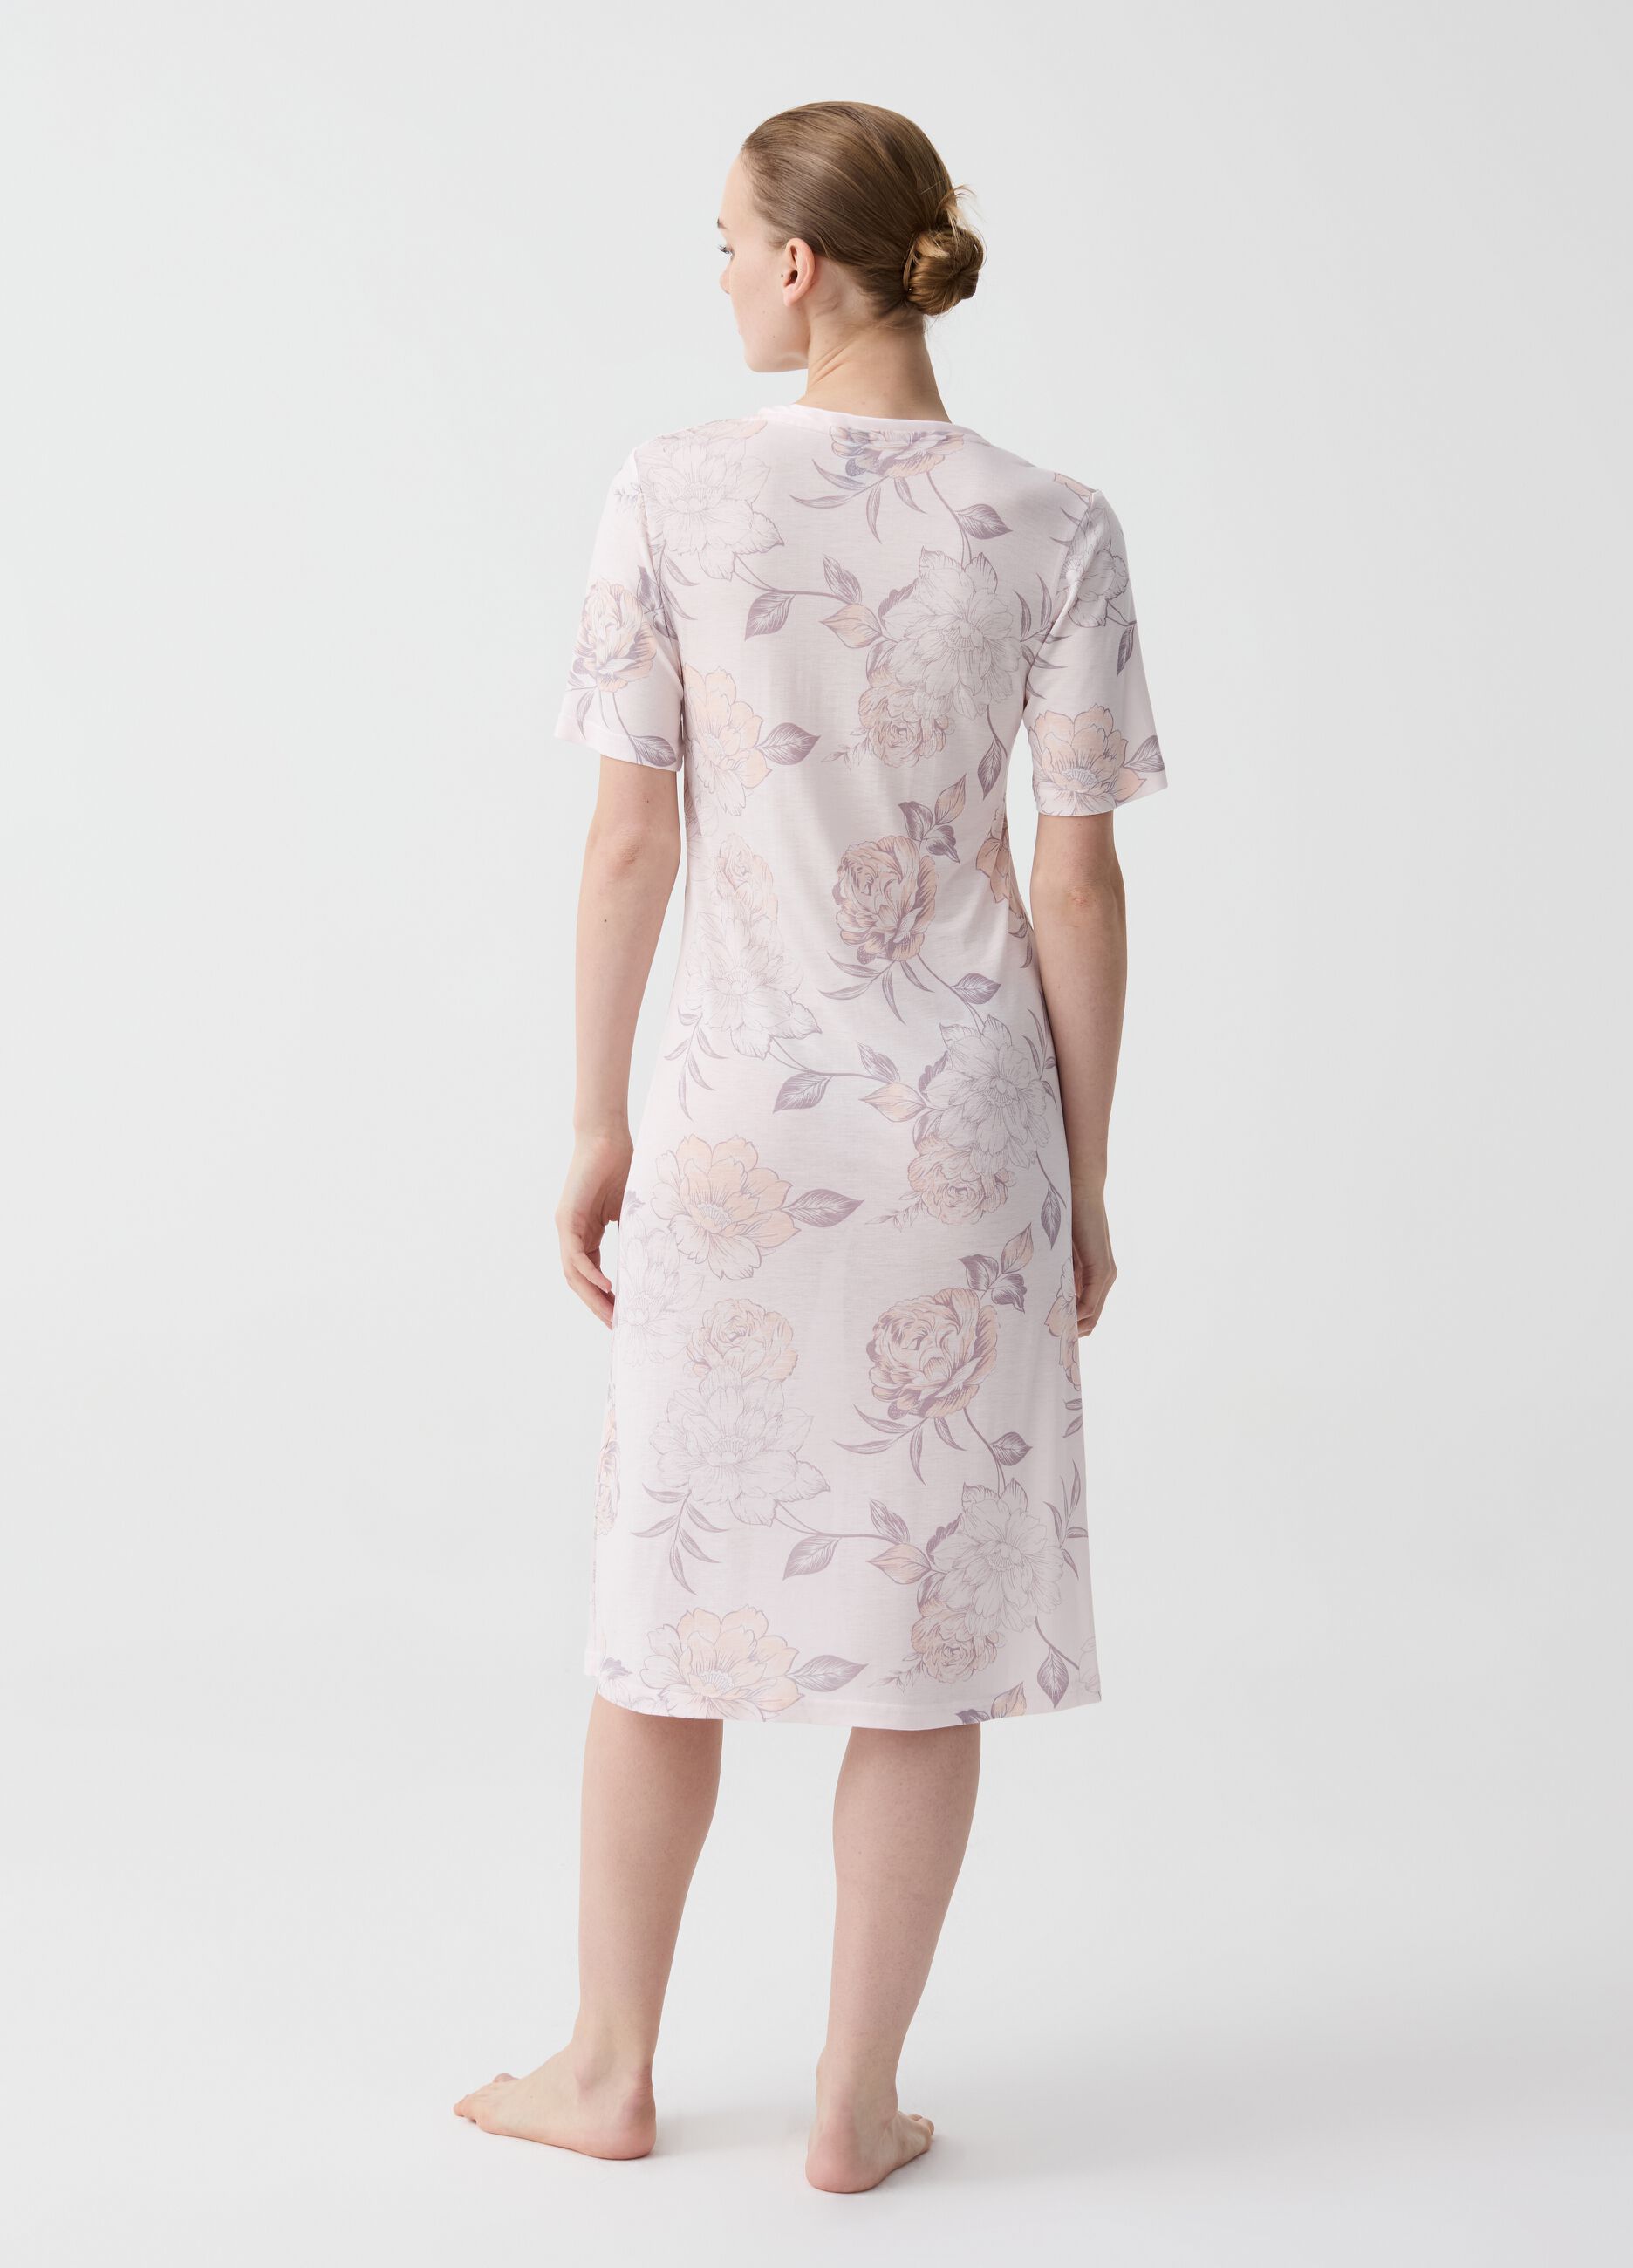 Floral patterned nightdress